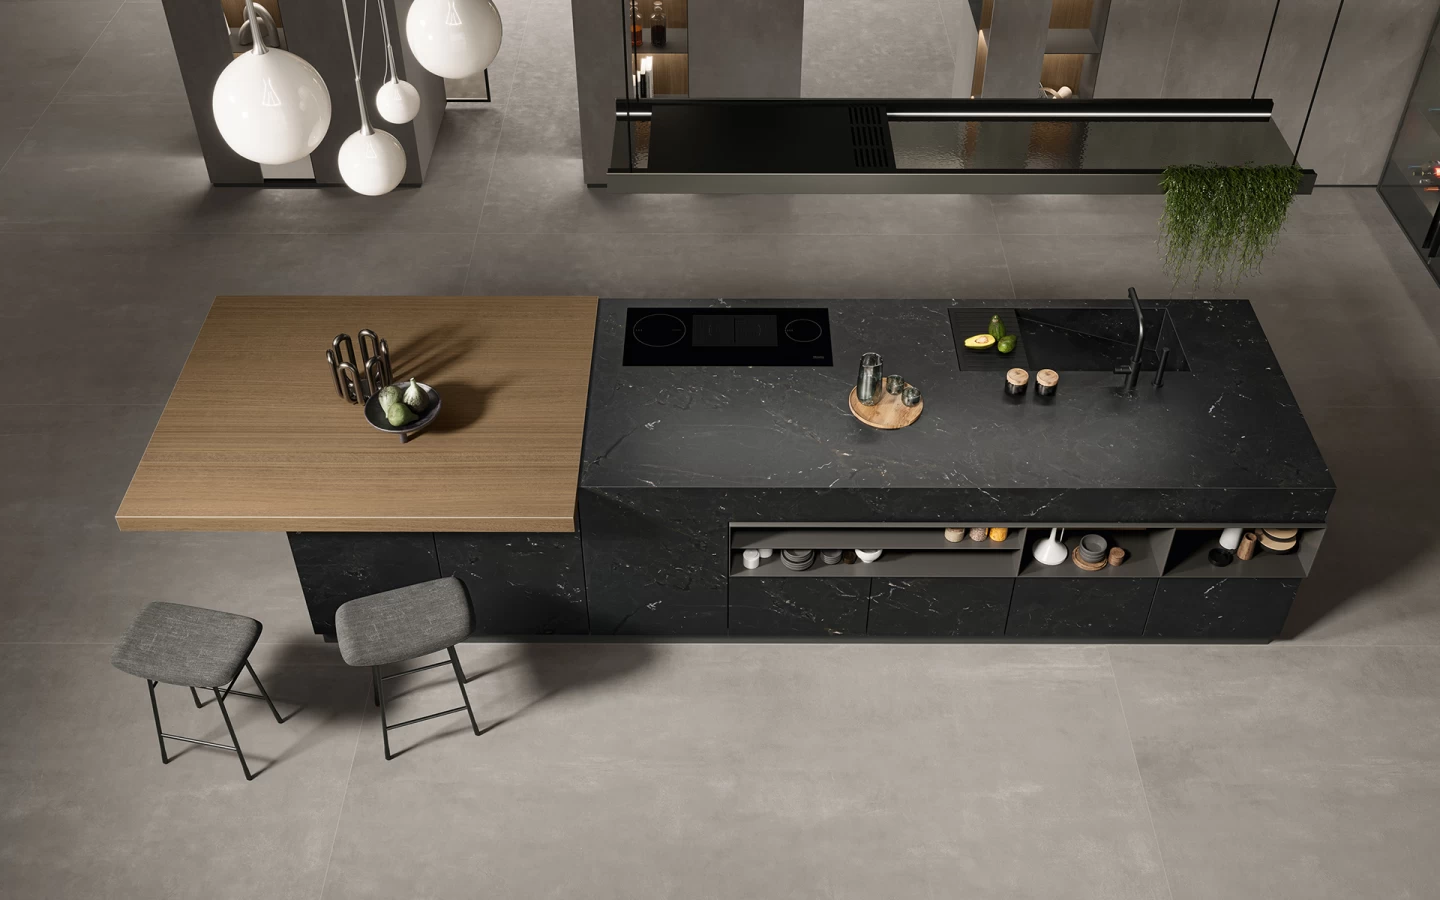 Negresco: dark stone effect porcelain tiles, a refined choice for distinguished interiors